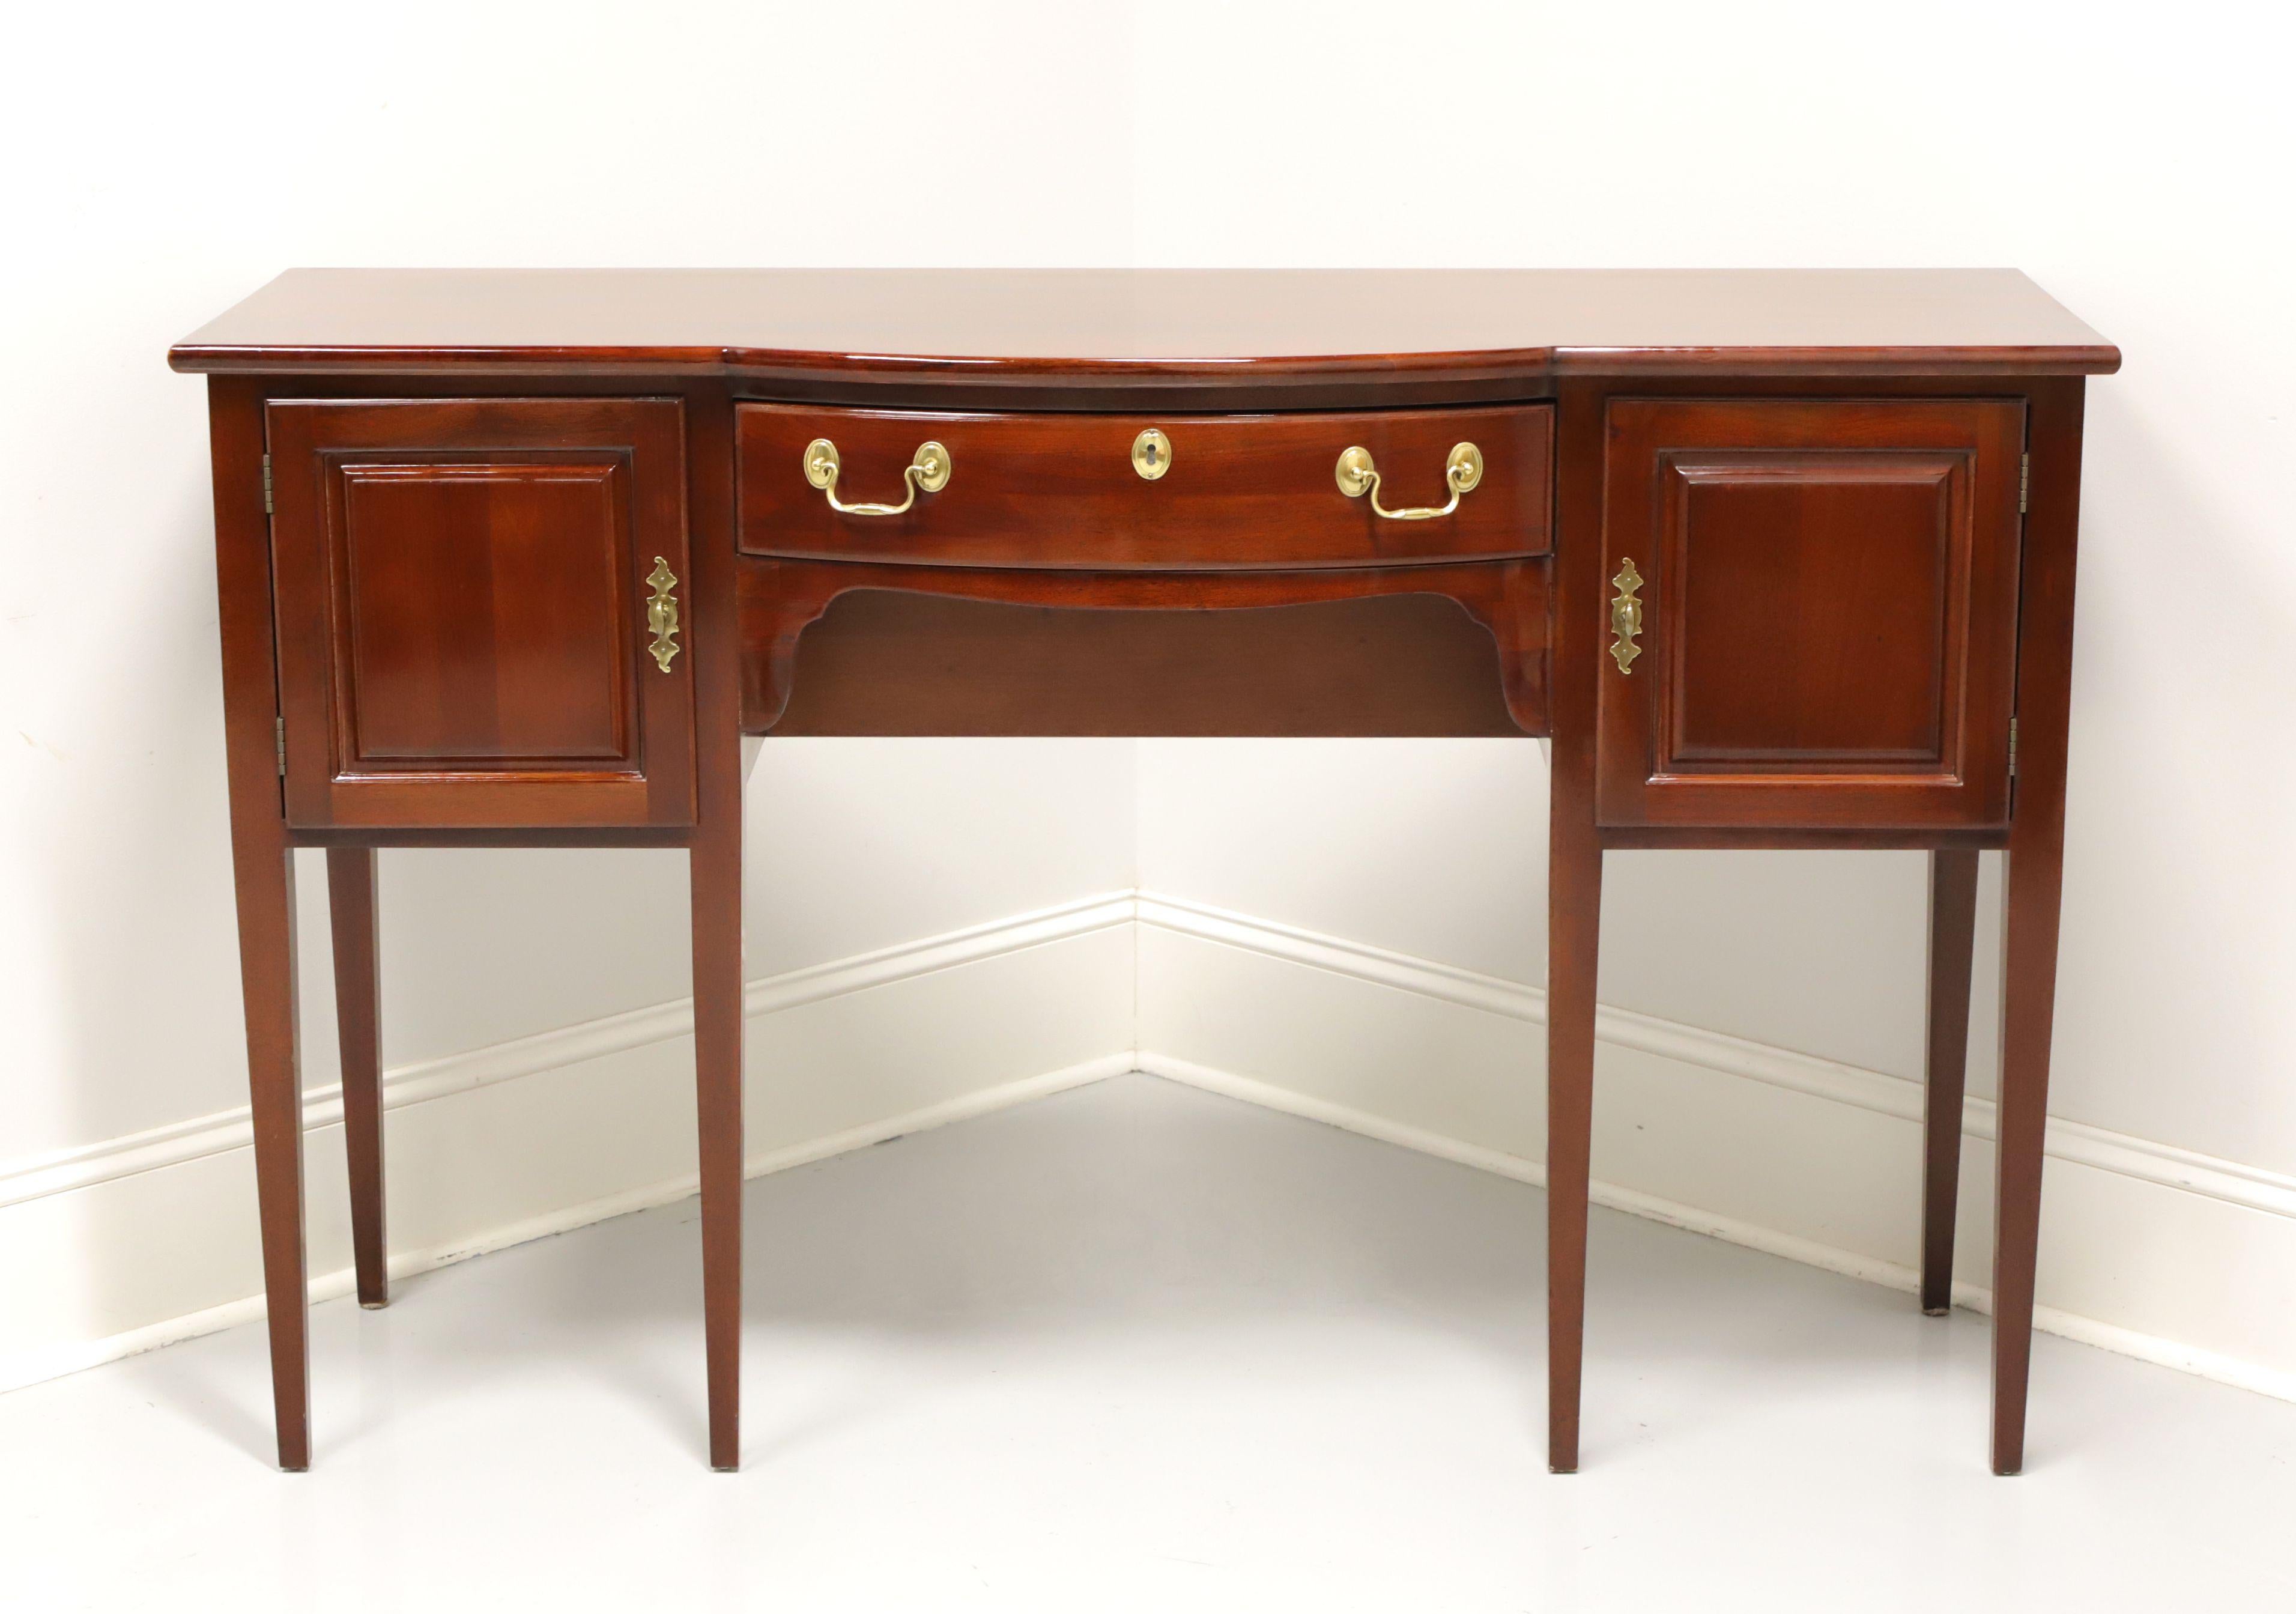 A Traditional style sideboard by Wellington Hall. Mahogany with brass hardware, bowed front and straight legs. Features one center dovetailed drawer with faux lockplate, flanked by dual side cabinets for storage. Made in Honduras, in the late 20th